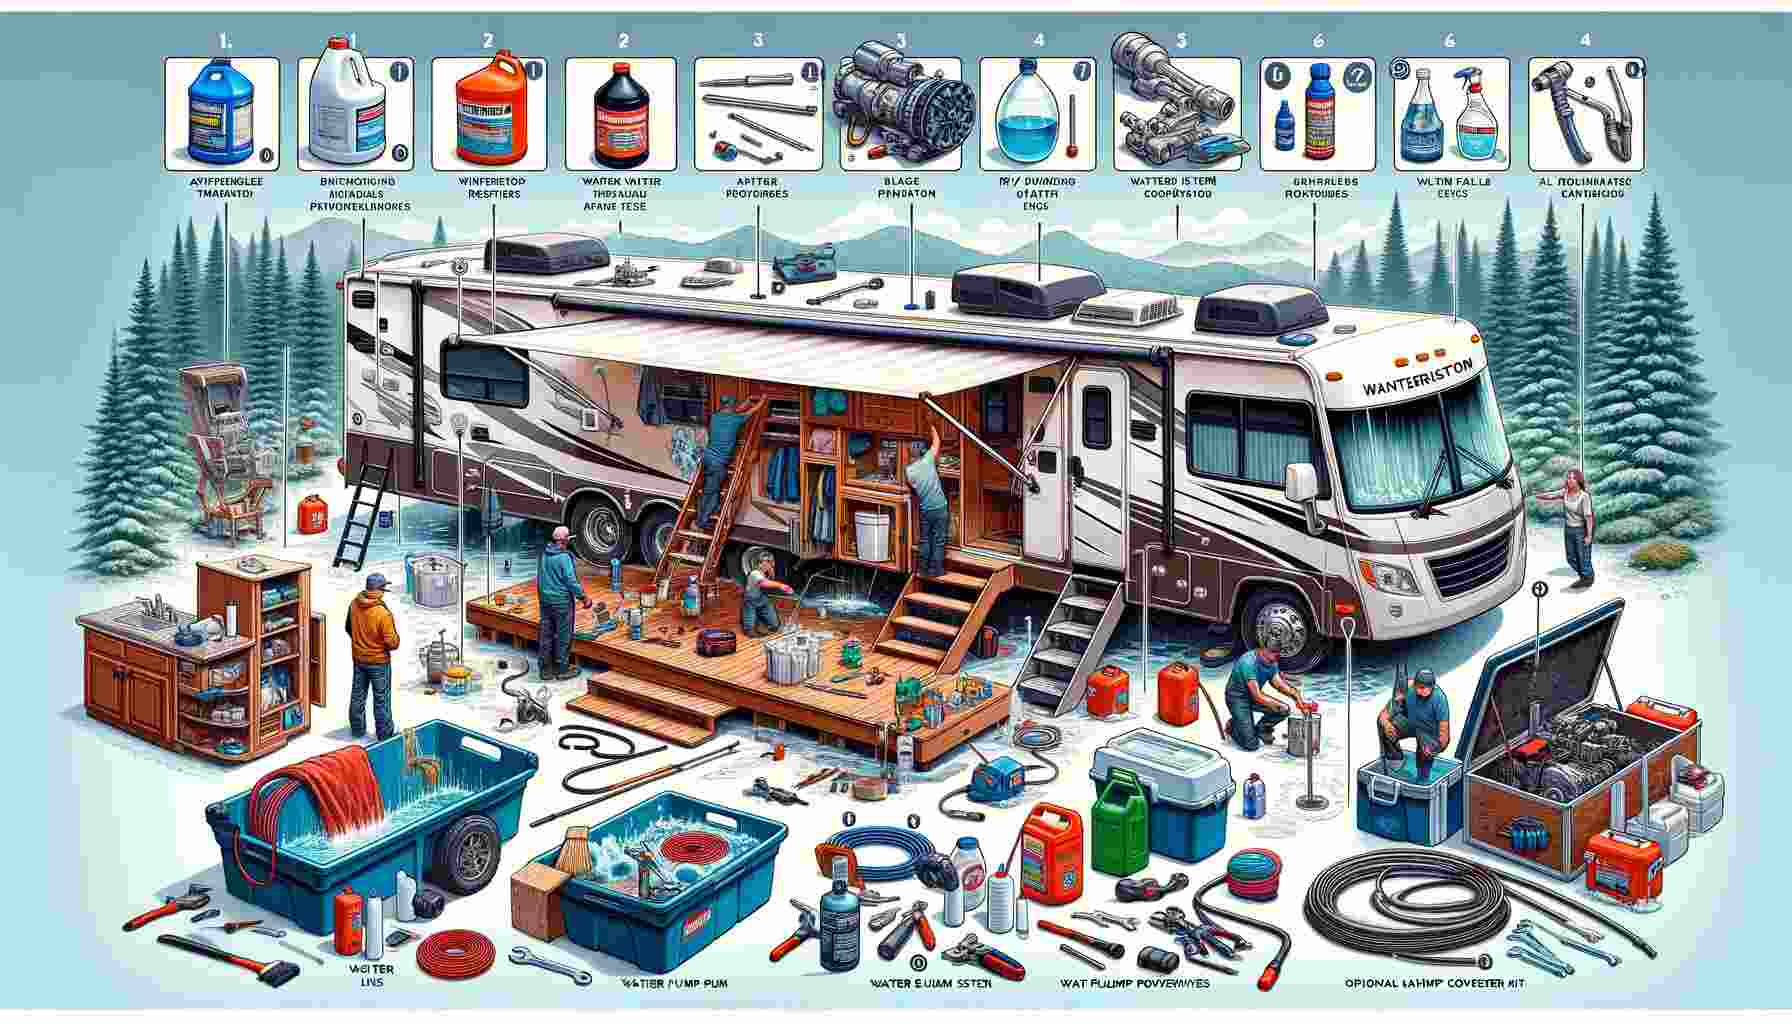 Here is an illustration showcasing the step-by-step process of winterizing an RV trailer. The image is divided into five sections, each representing a different step of the process: gathering necessary supplies, exterior preparations, interior preparations, protecting the plumbing system, and storing the RV trailer. Each section is clearly labeled and visually distinct to represent each step.